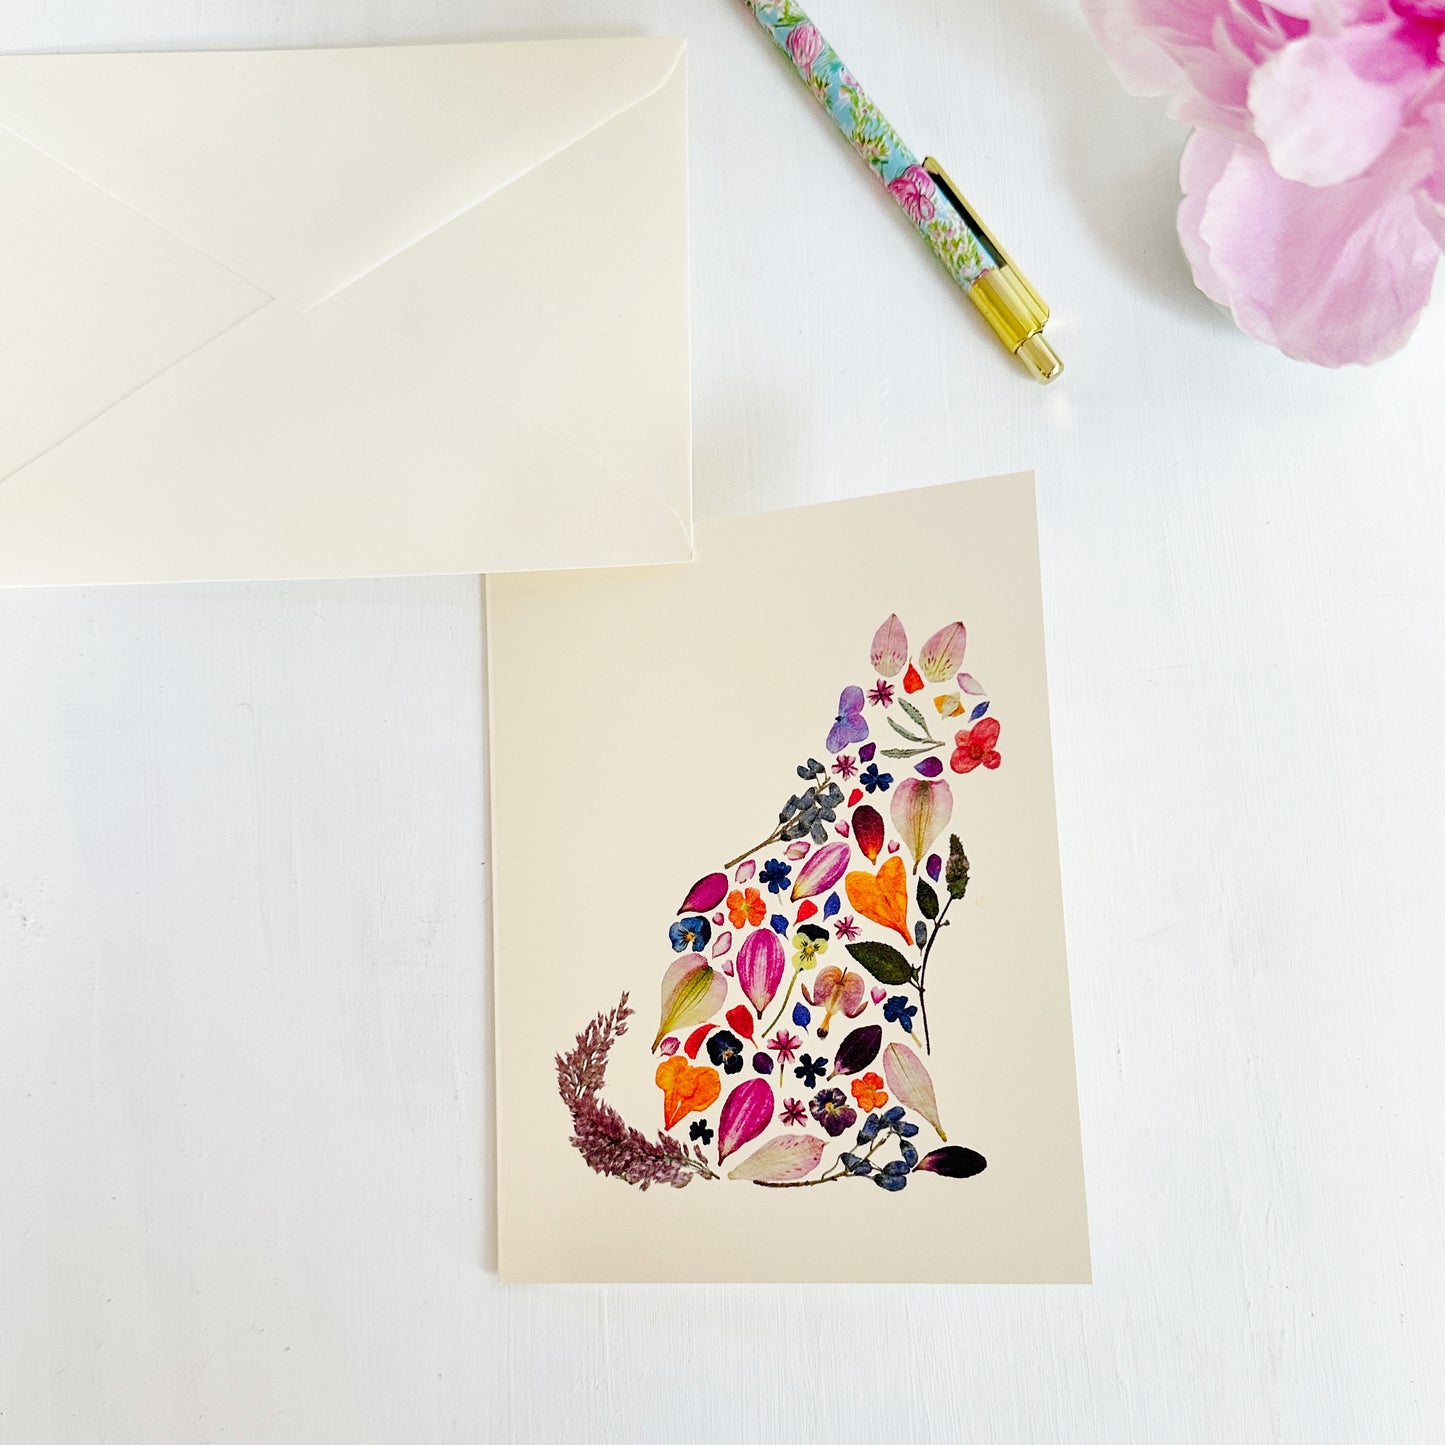 Botanical Cat - Printed pressed flowers and leaves in the shape of a cat blank greeting card